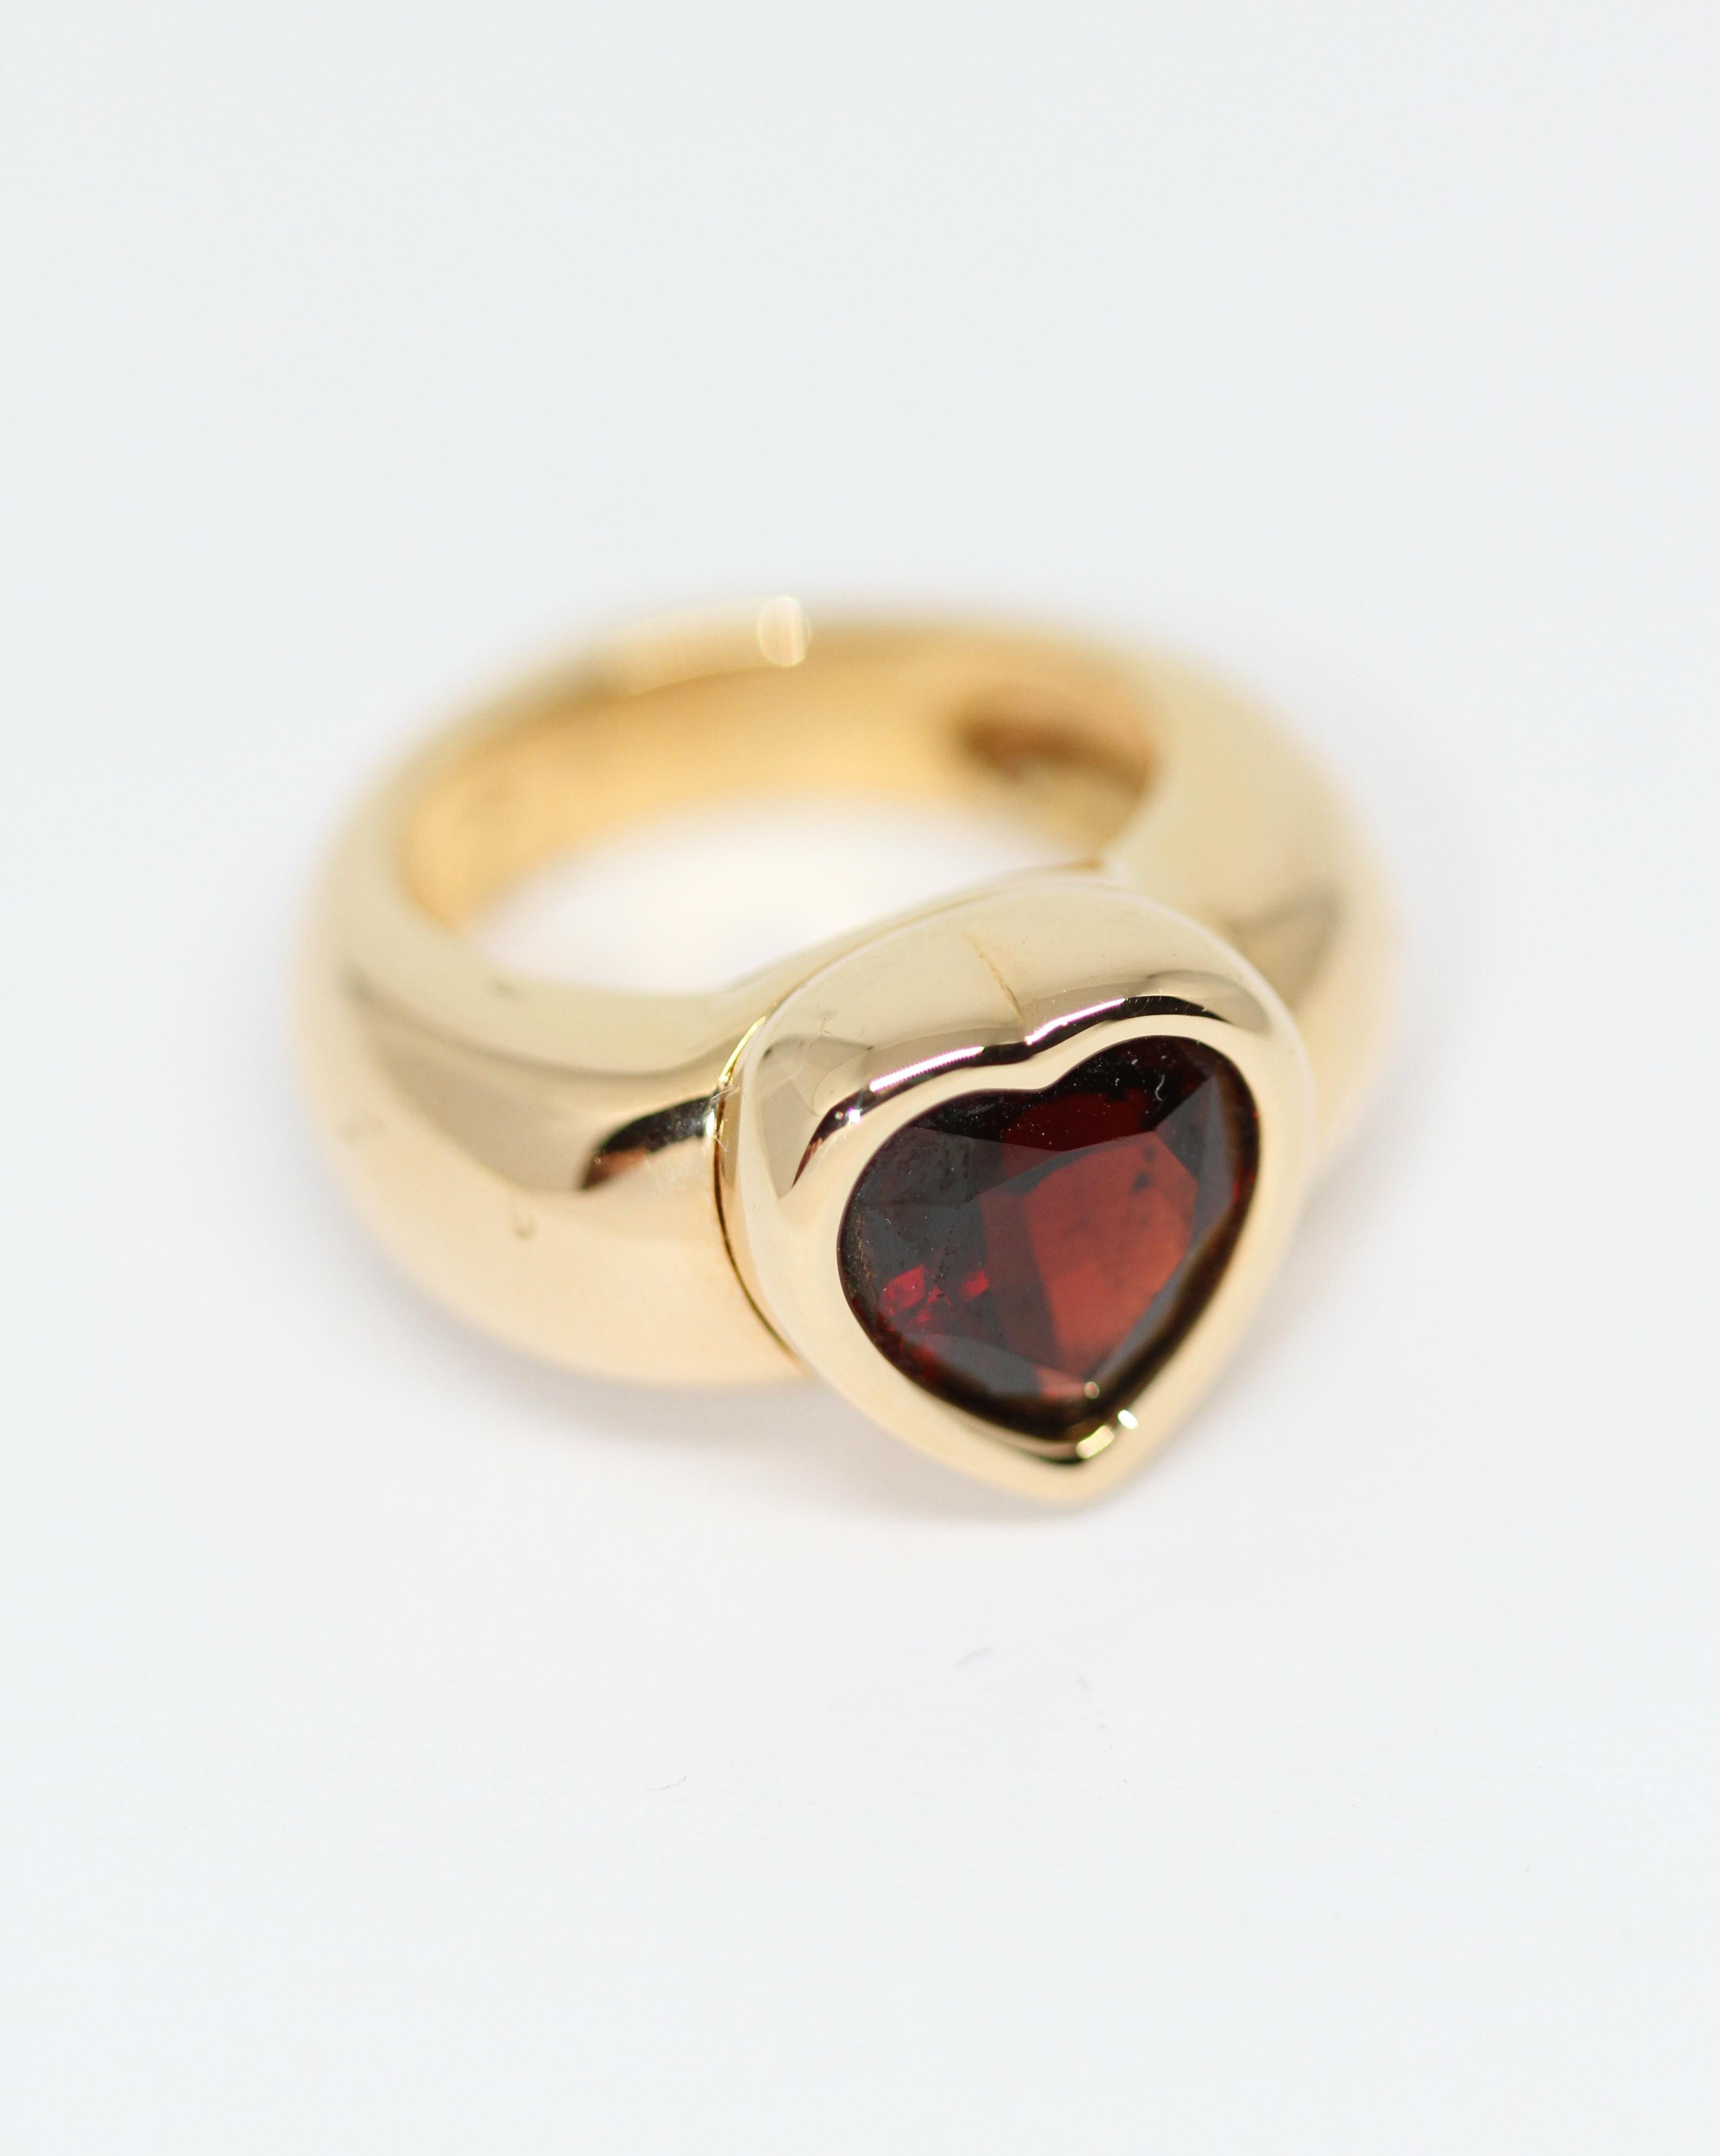 This elegant ring signed from the house of Piaget is made in 18kt rose gold and set with a heart shape garnet. 

Year: 1997
Collection: Heart
Material: 18 kt rose gold and garnet - rhodolite
Size: 52 - approx. 6.5
Weight: 14.99gr
Condition: